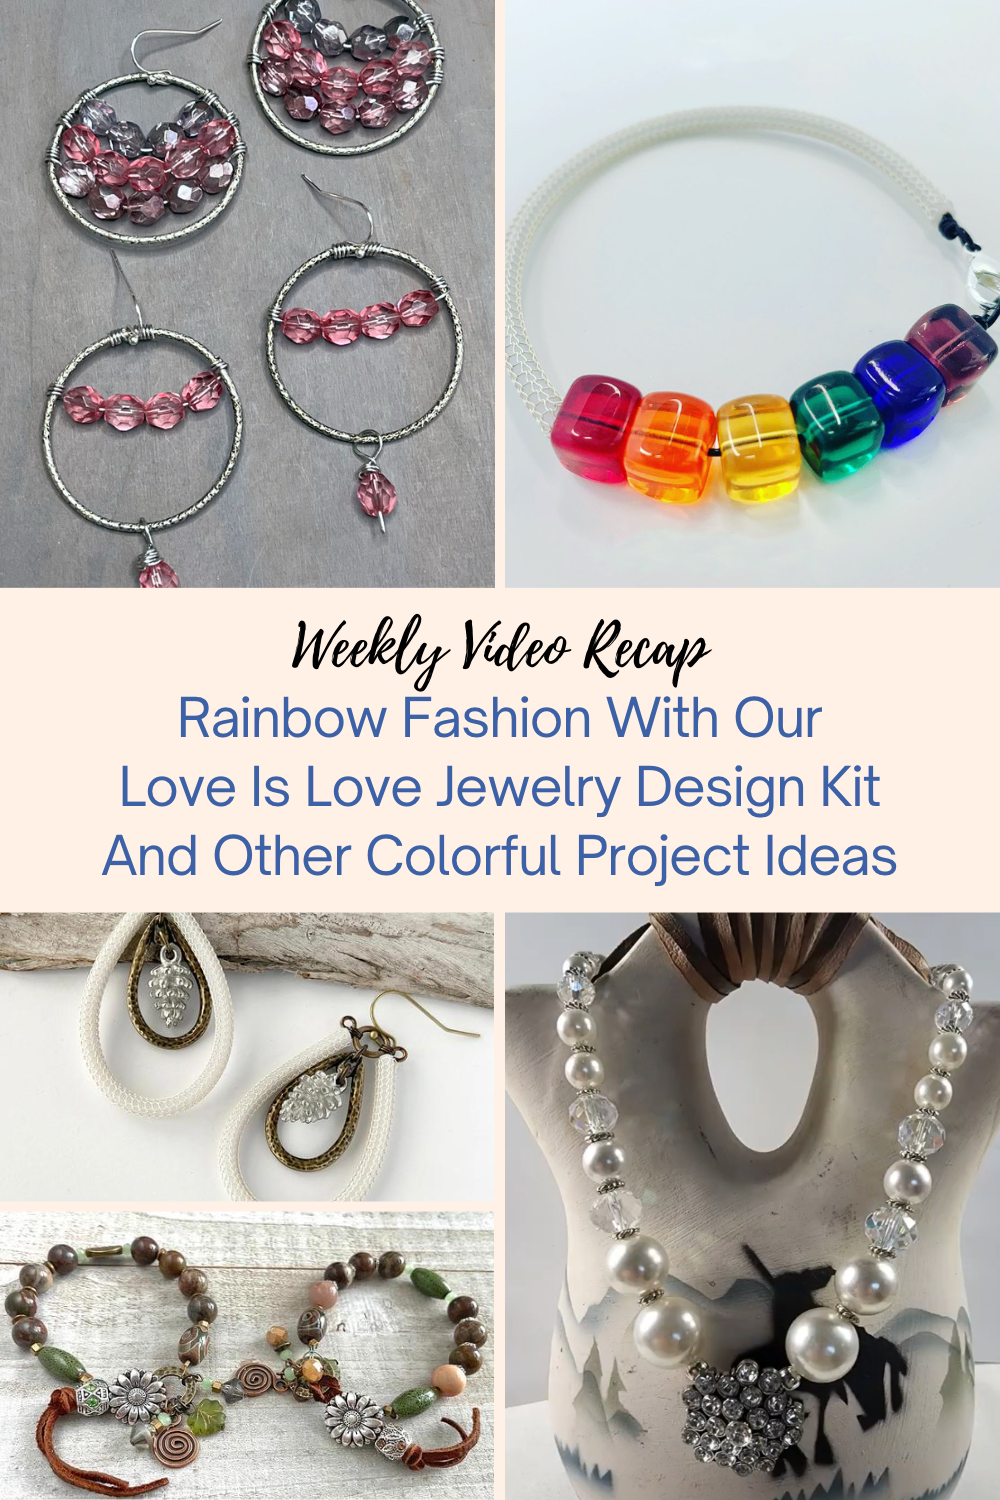 Rainbow Fashion With Our Love Is Love Jewelry Design Kit And Other Colorful Project Ideas Collage